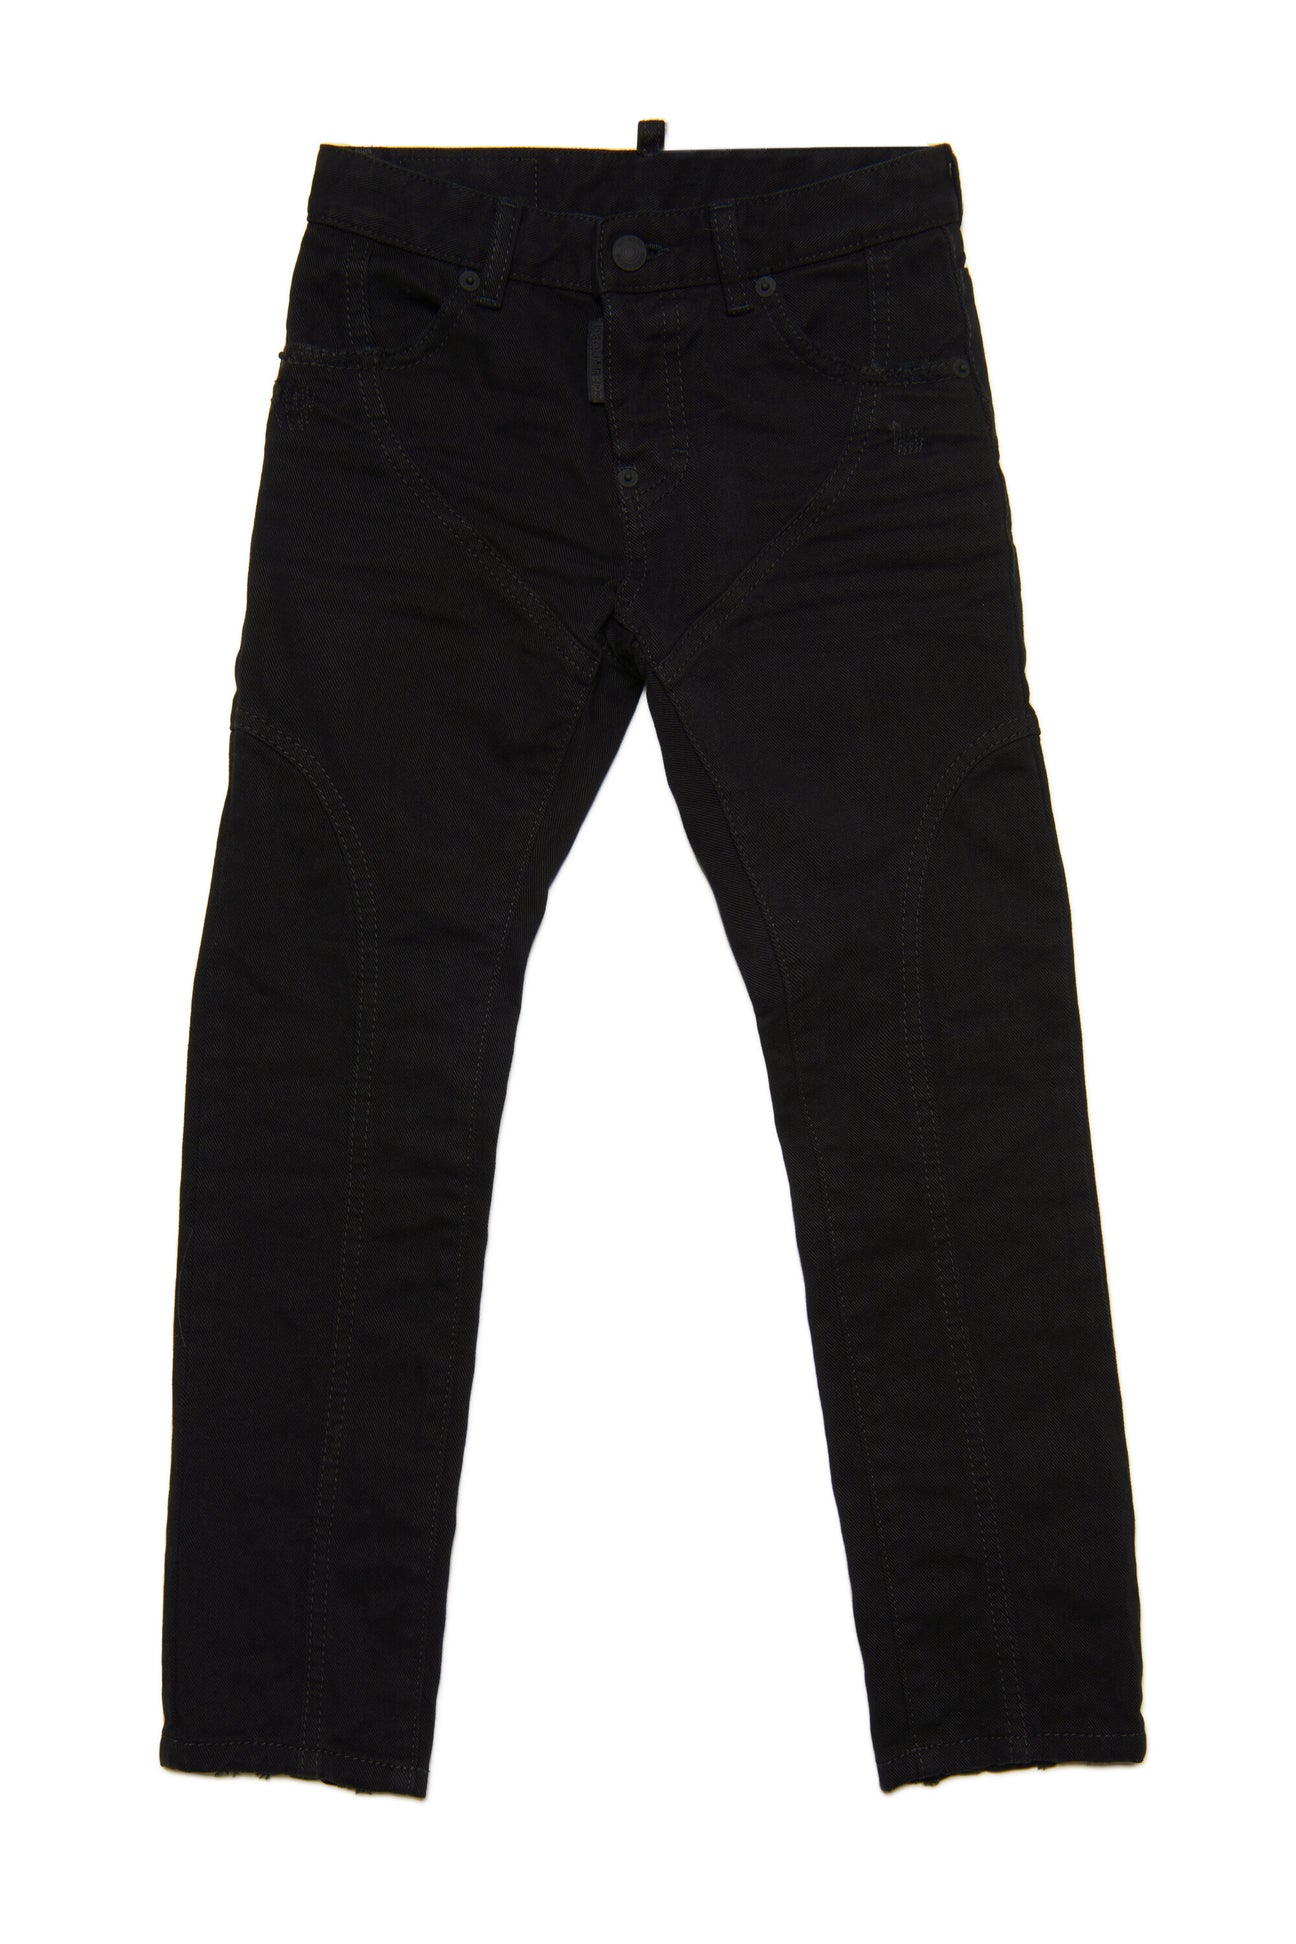 Cool Guy skinny black jeans with abrasions and Icon logo 